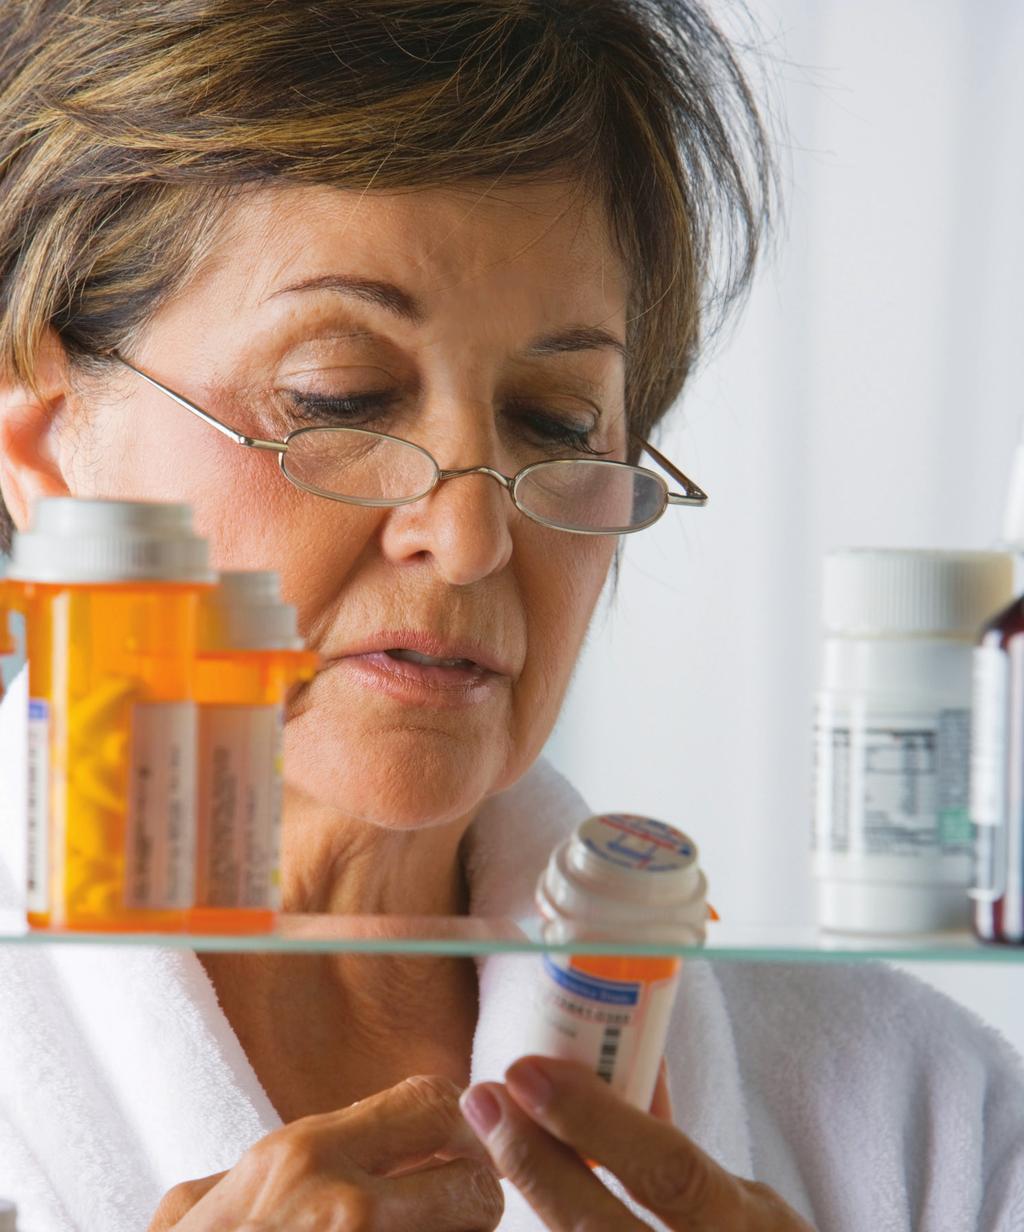 Older adults use more medicines than people in other age groups You may be surprised to learn that people like Gail and Alice who are over 65 years old tend to take more